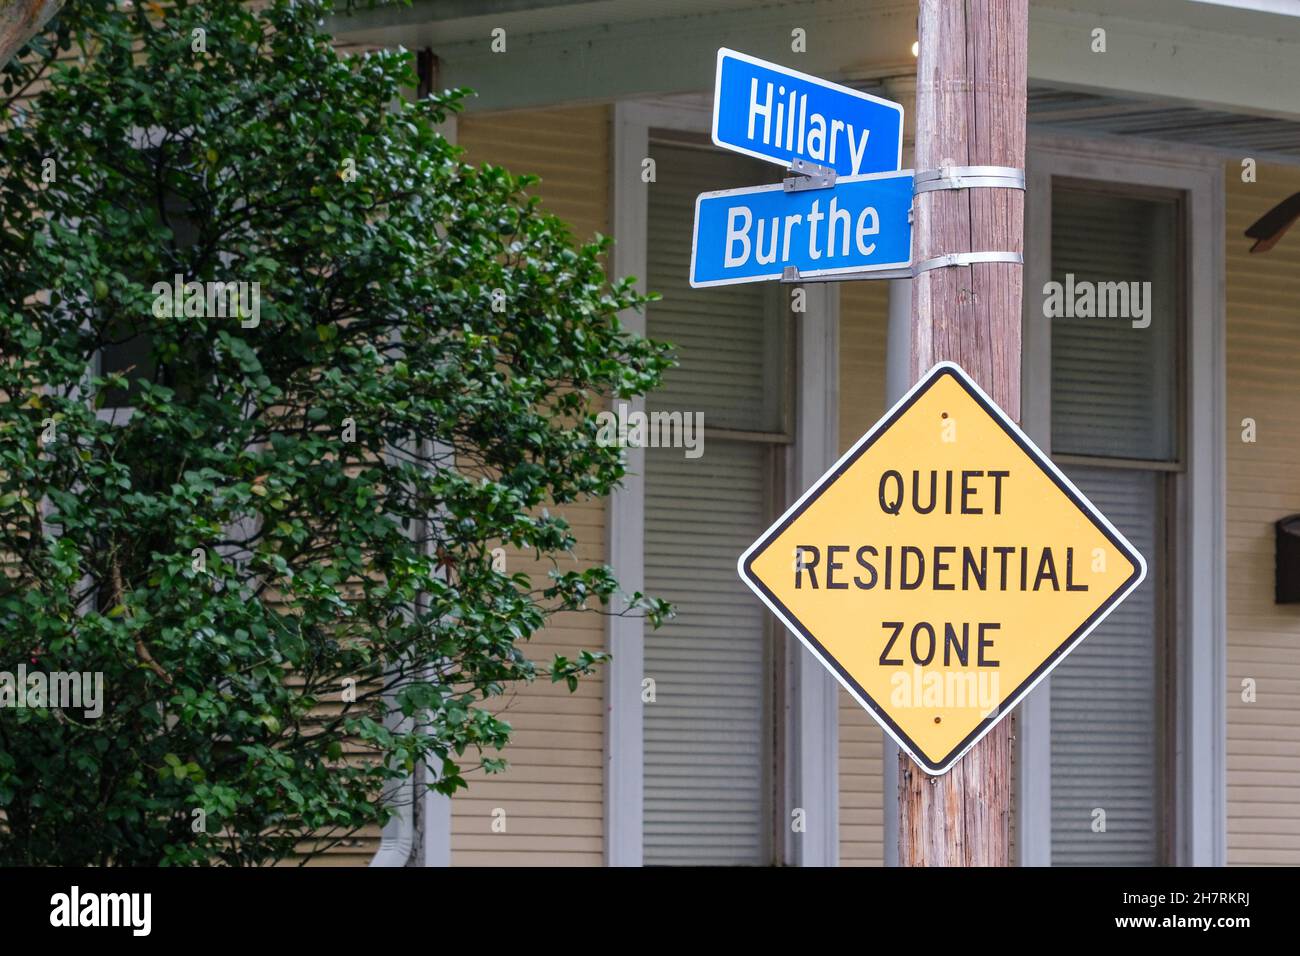 NEW ORLEANS, LA, USA - AUGUST 26, 2021: 'Quiet Residential Zone' sign in Uptown Neighborhood Stock Photo